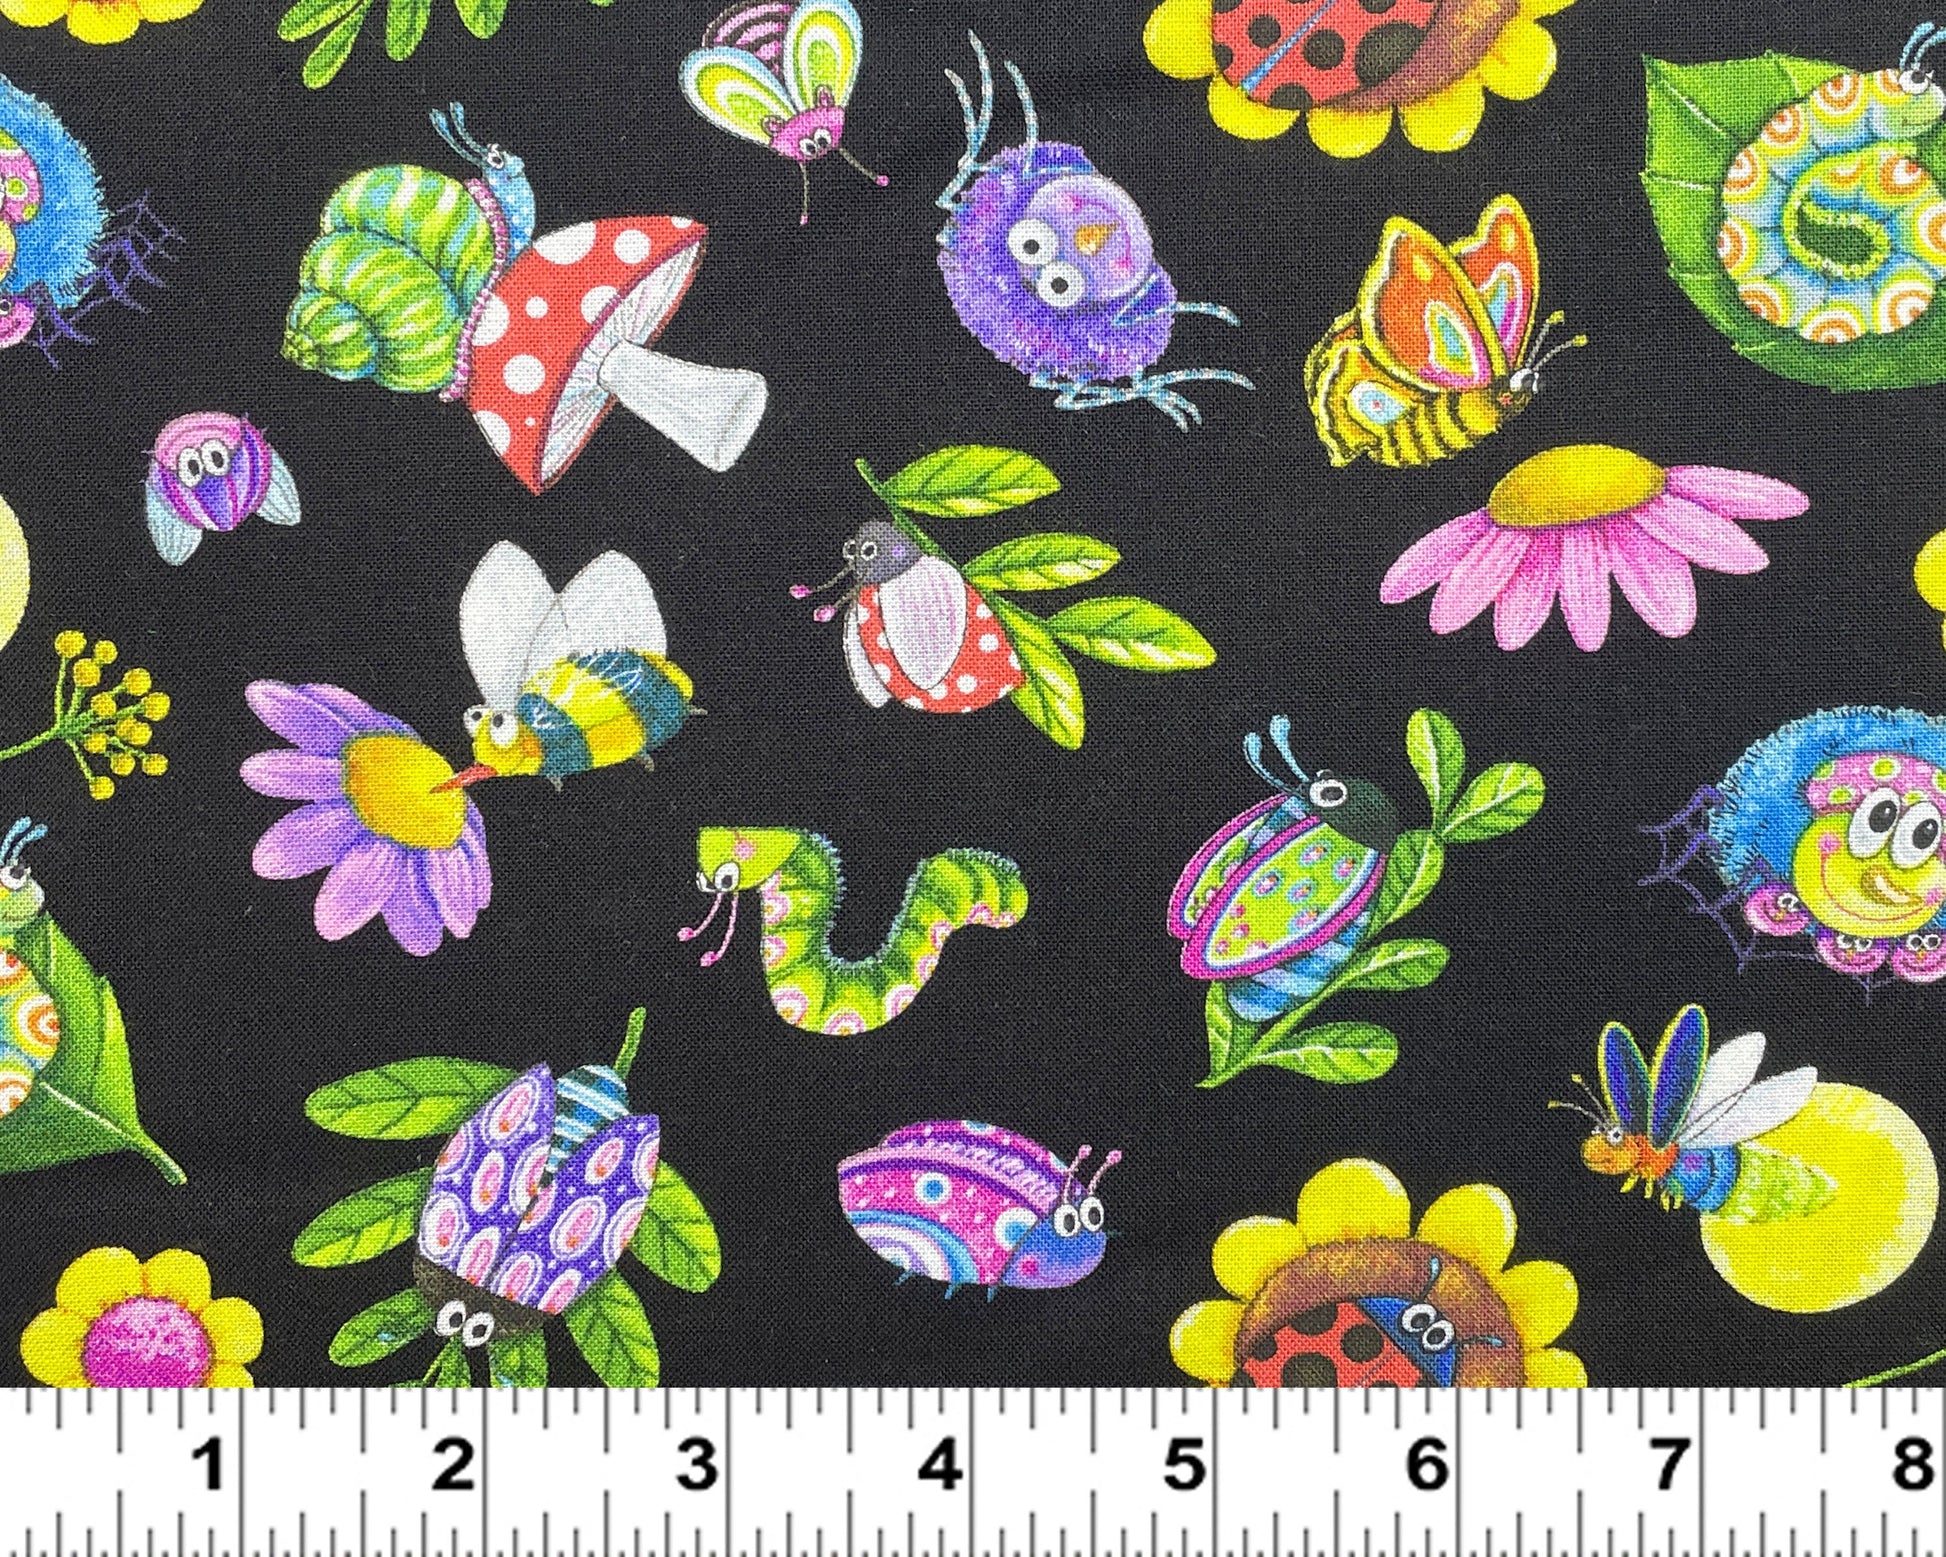 Cute Insect Fabric - 100% cotton - Elizabeth's Studio - Gardening fabric Spider Butterfly Ladybug Beetle Fly Mushroom - SHIPS NEXT DAY